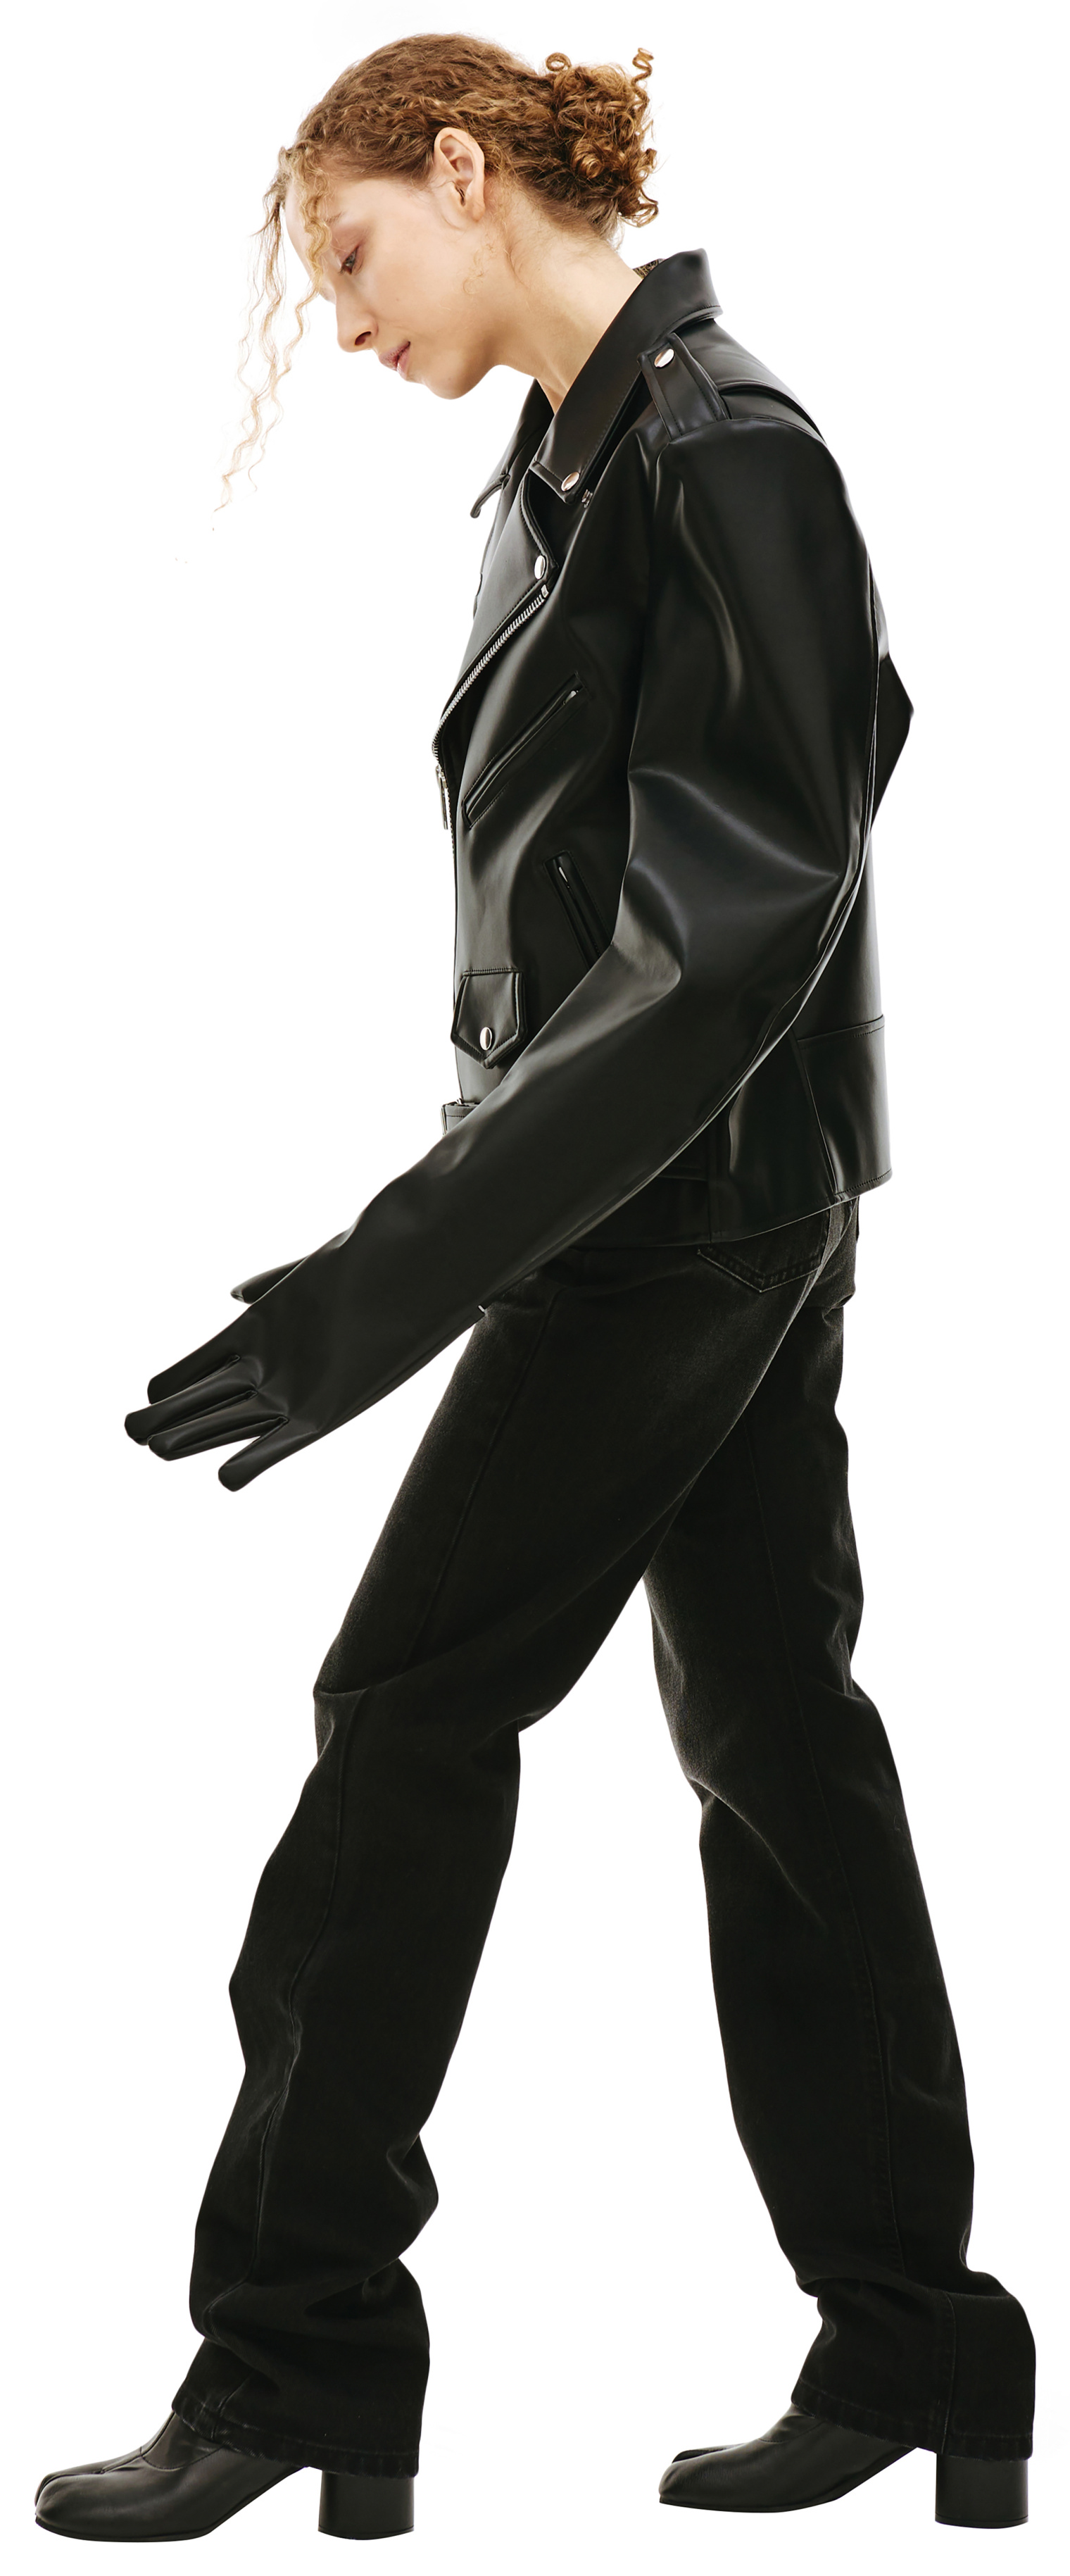 Doublet Glove Sleeve Rider\'s Leather Jacket